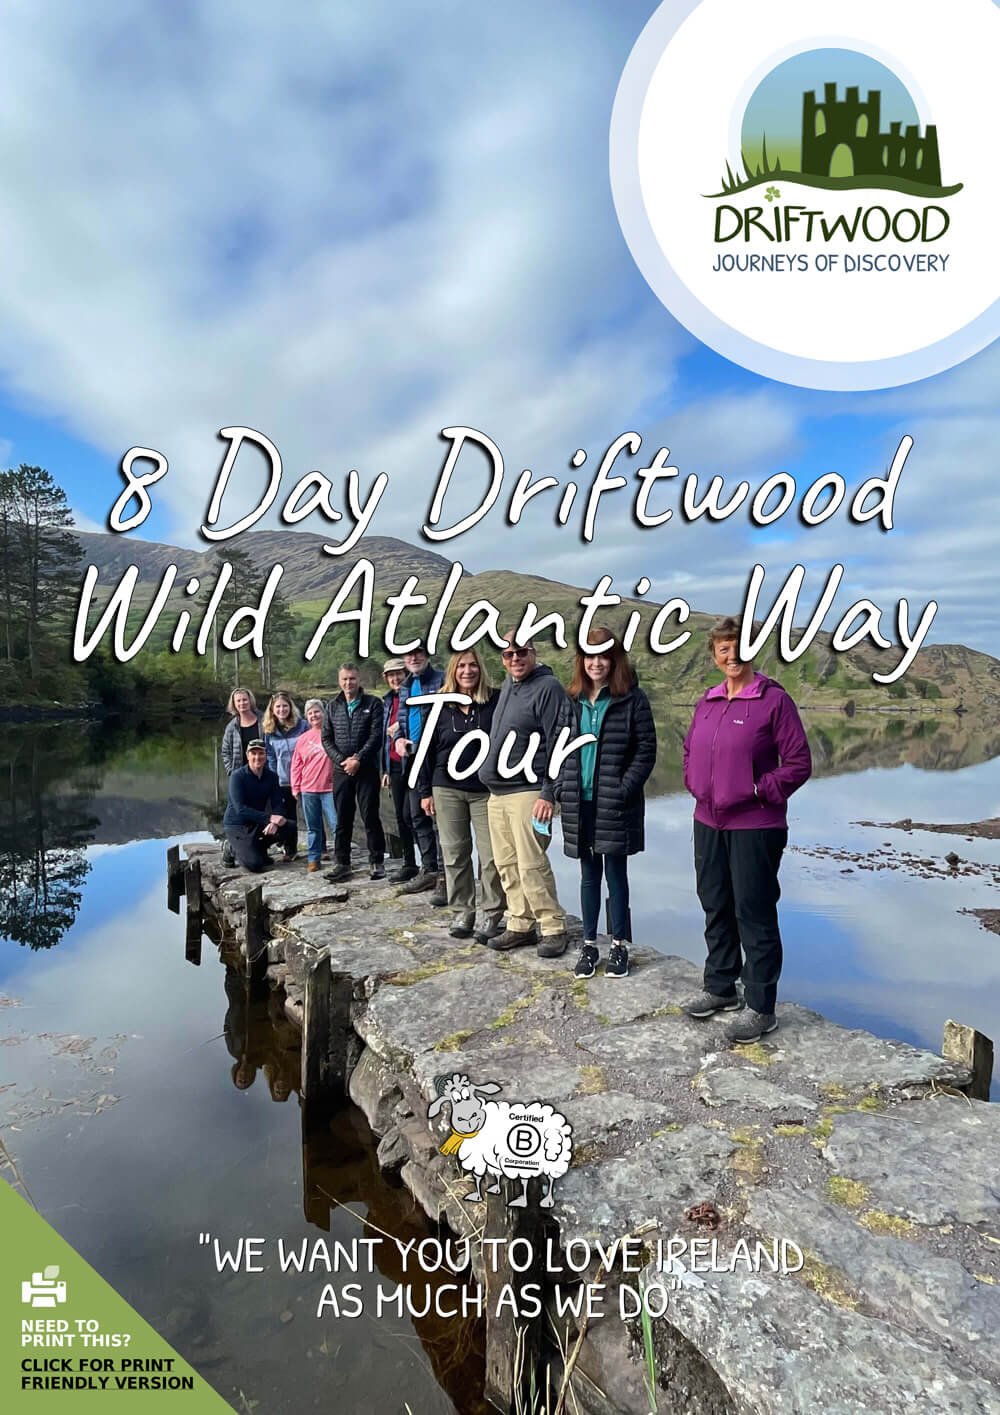 8 Day Driftwood Wild Atlantic Way Tour itinerary cover